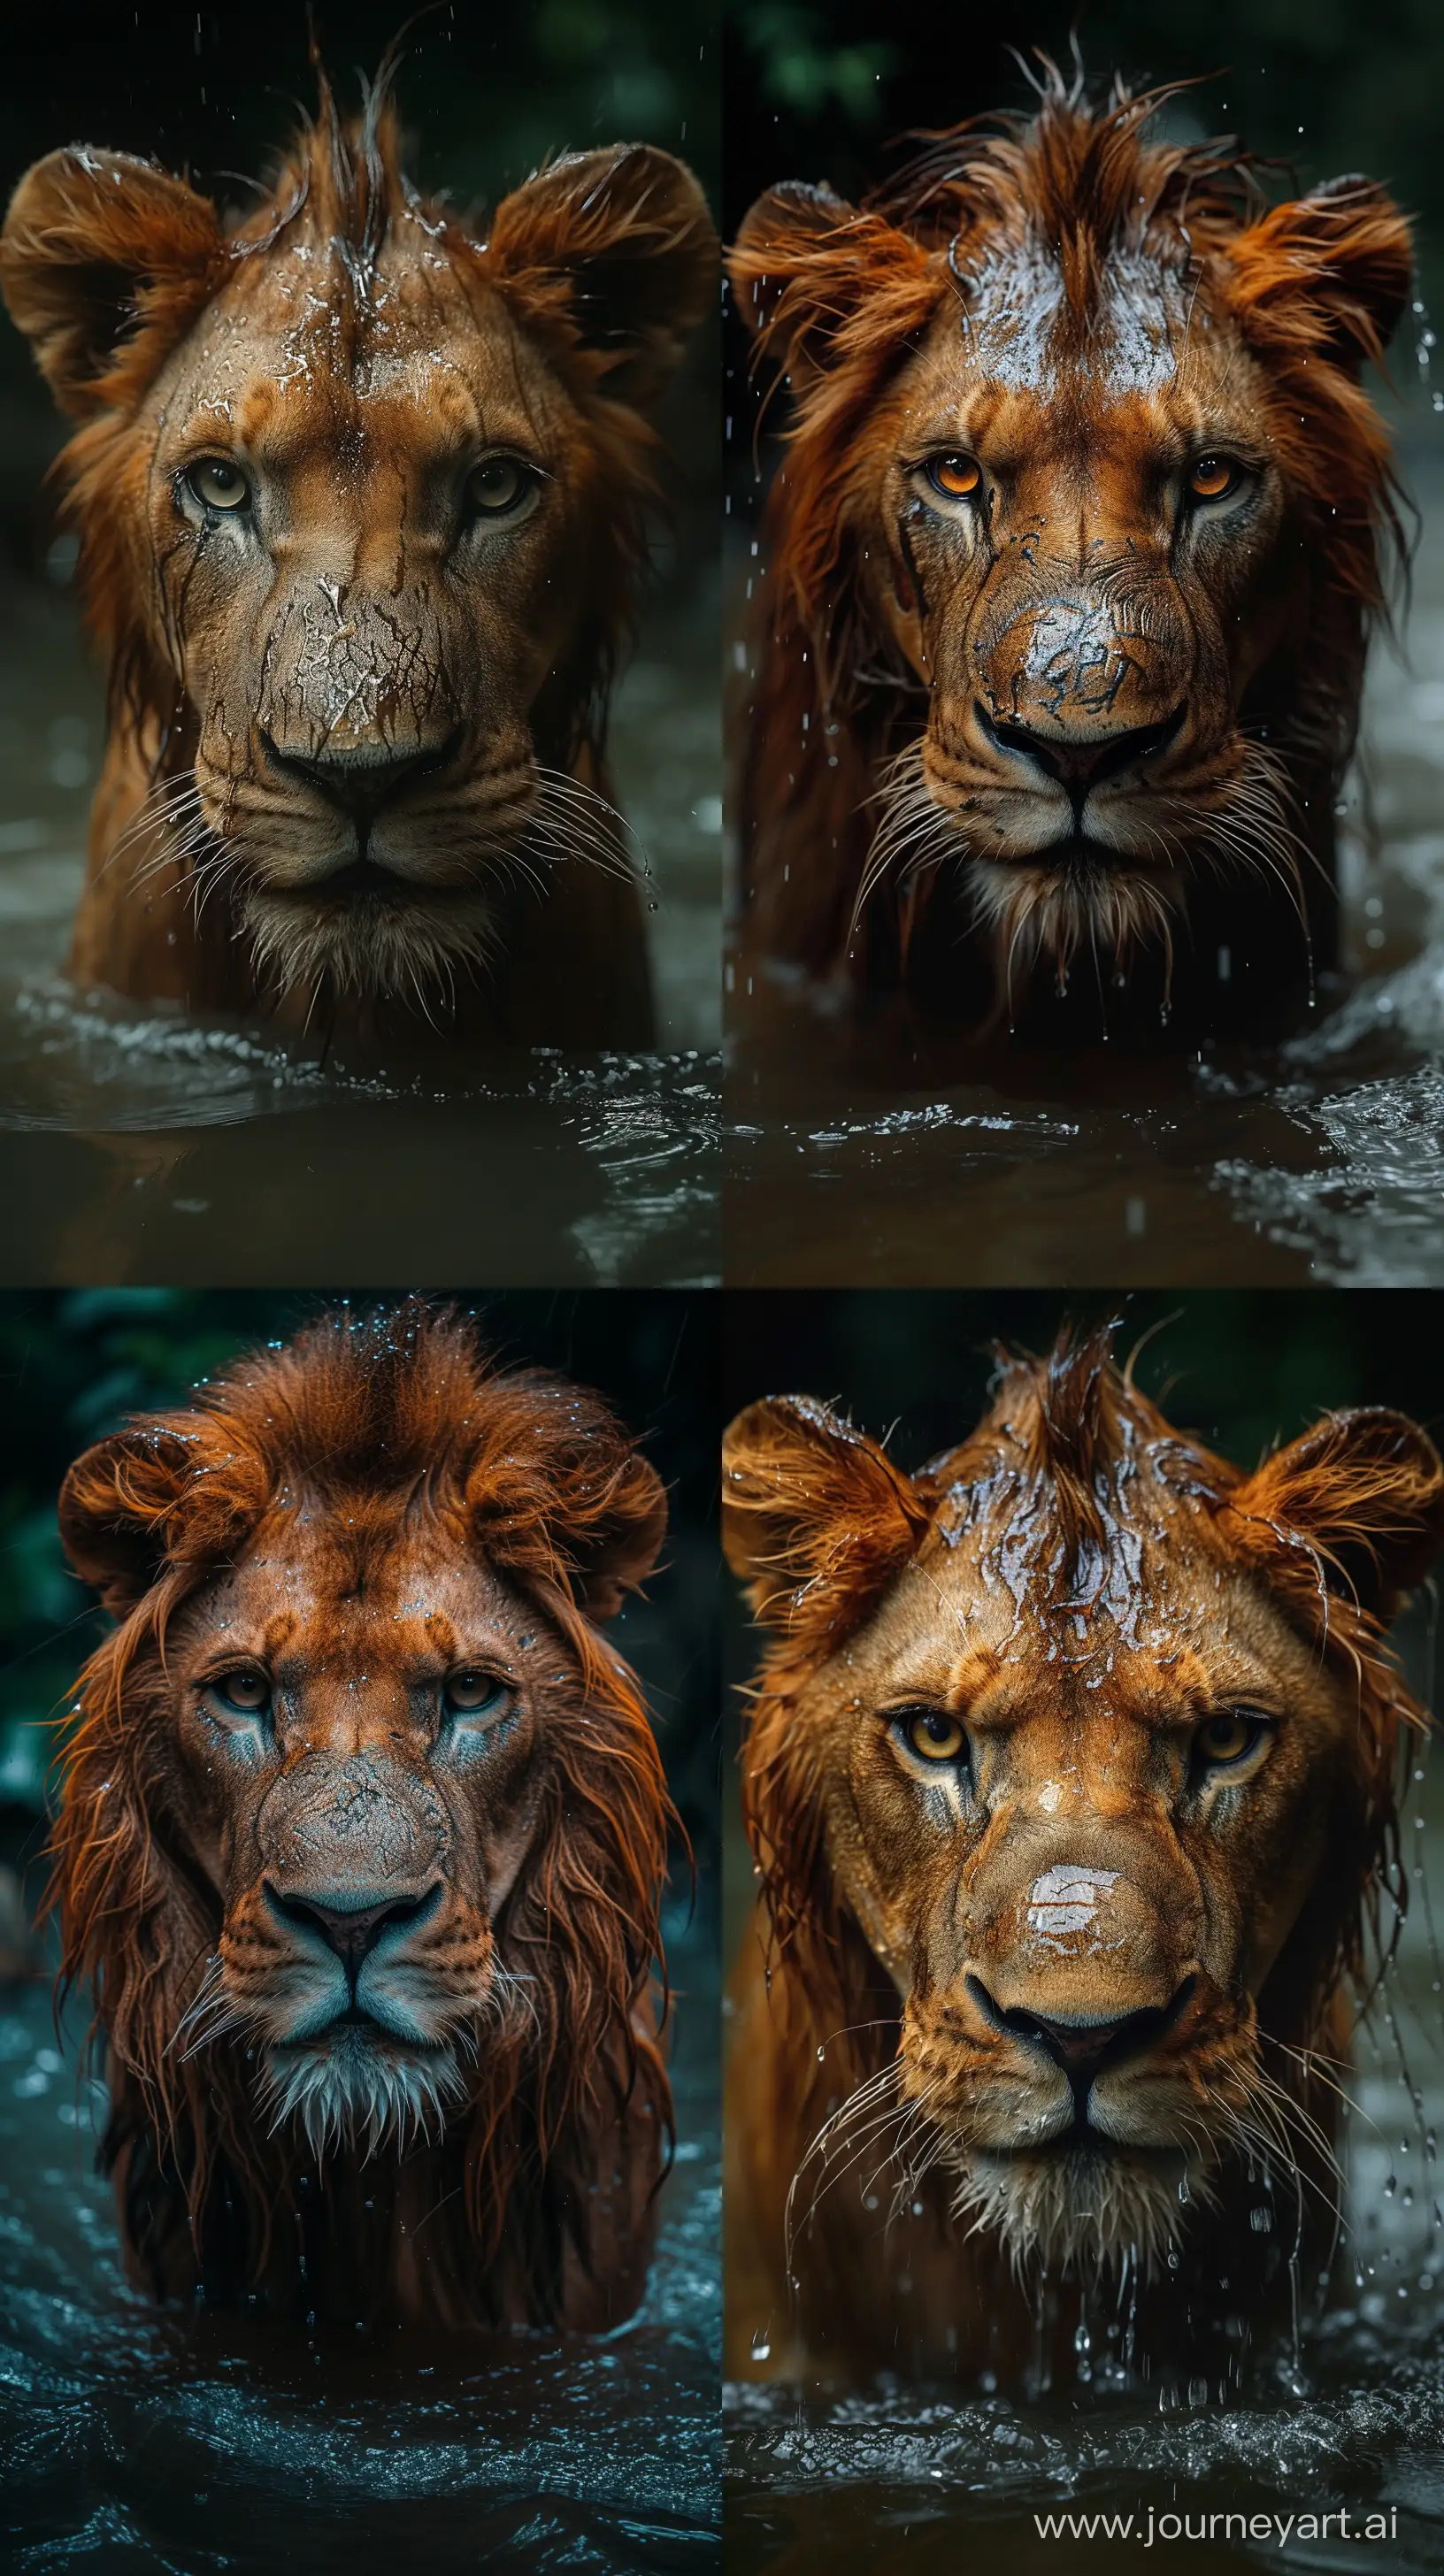 Surreal-Dystopian-Lion-Face-Submerged-in-Water